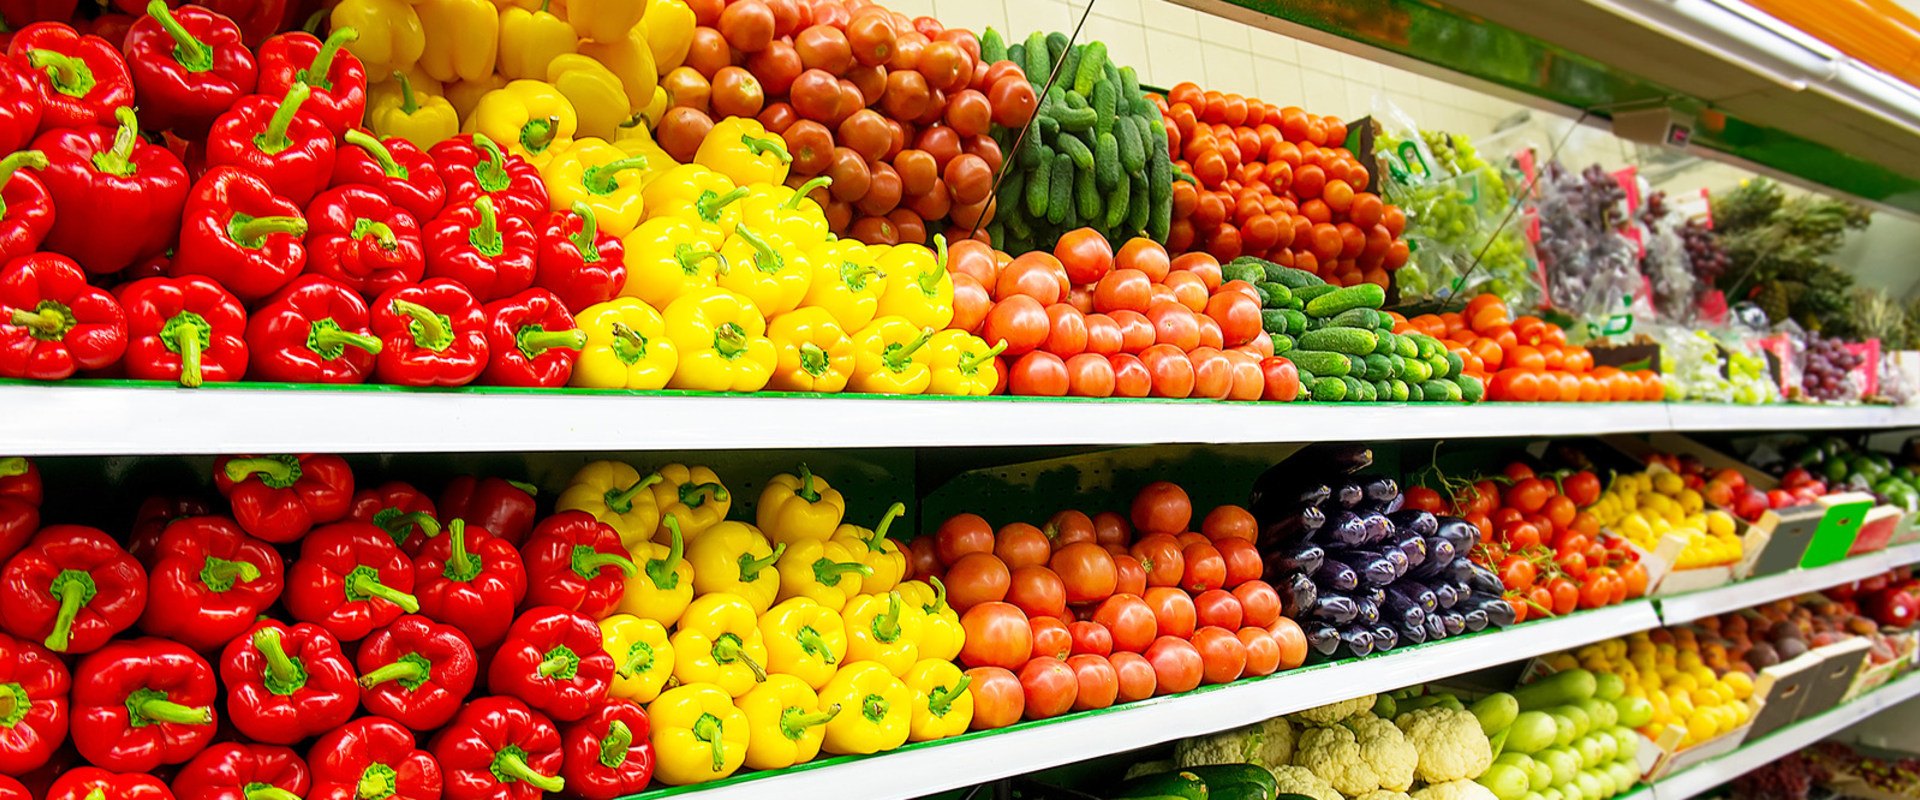 Where Does Grocery Store Produce Come From?